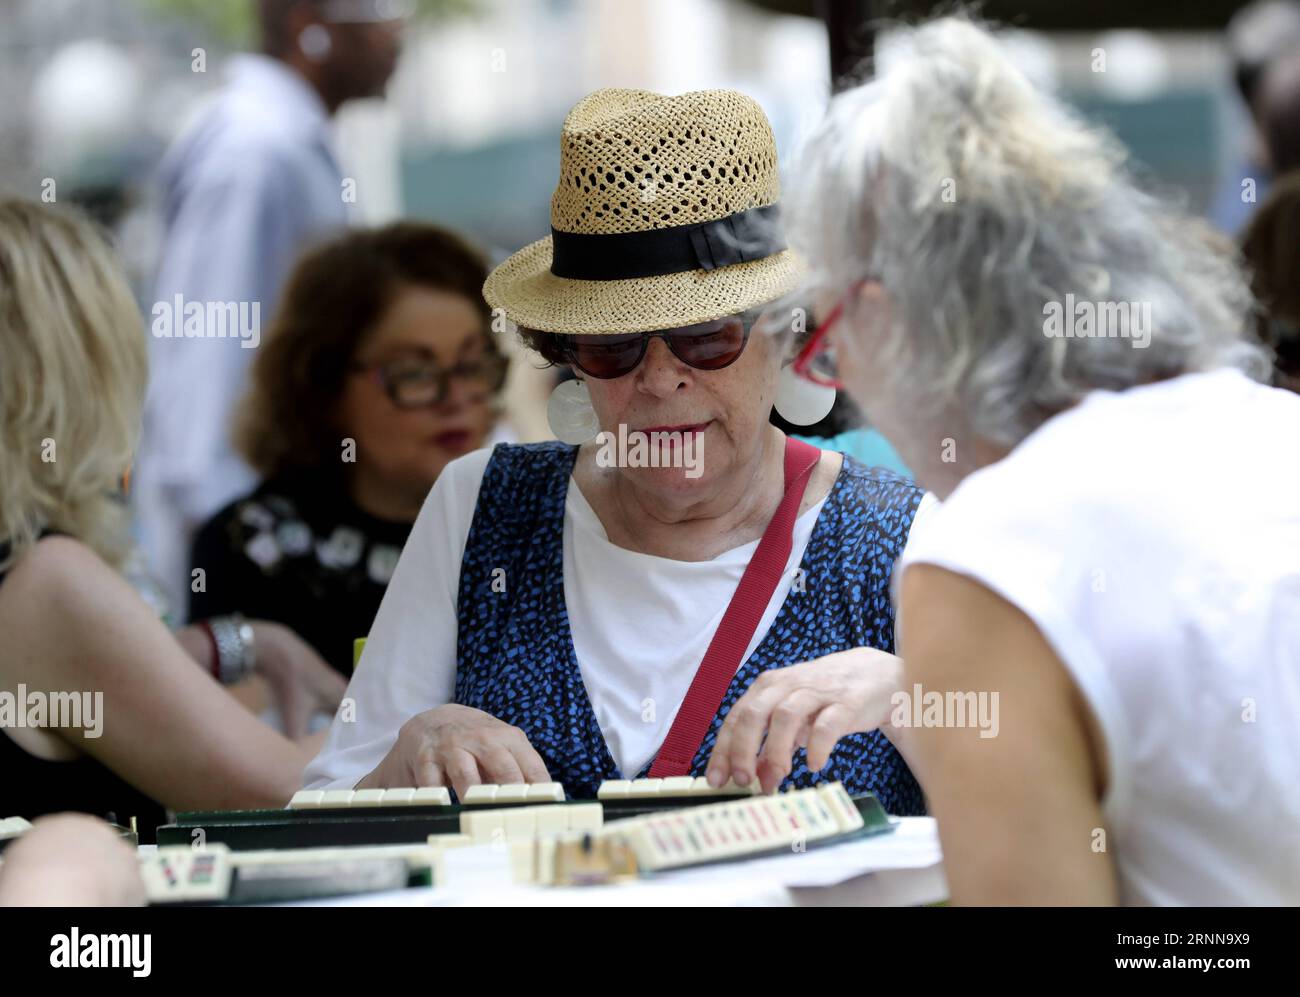 (170703) -- NEW YORK, July 3, 2017 -- Hobbyists play Mah Jongg during the Mah Jongg Marathon event at Bryant Park in New York City, the United States, on July 3, 2017. According to event organizer Linda Fisher, the event is organized to provide a place for Mah Jongg hobbyists to communicate with each other and promote the game to more people. Mah Jongg, originated from China, was introduced to the United States in the 1920s. ) U.S.-NEW YORK-MAH JONGG MARATHON WangxYing PUBLICATIONxNOTxINxCHN   New York July 3 2017 hobbyists Play Mah Jongg during The Mah Jongg Marathon Event AT Bryant Park in N Stock Photo